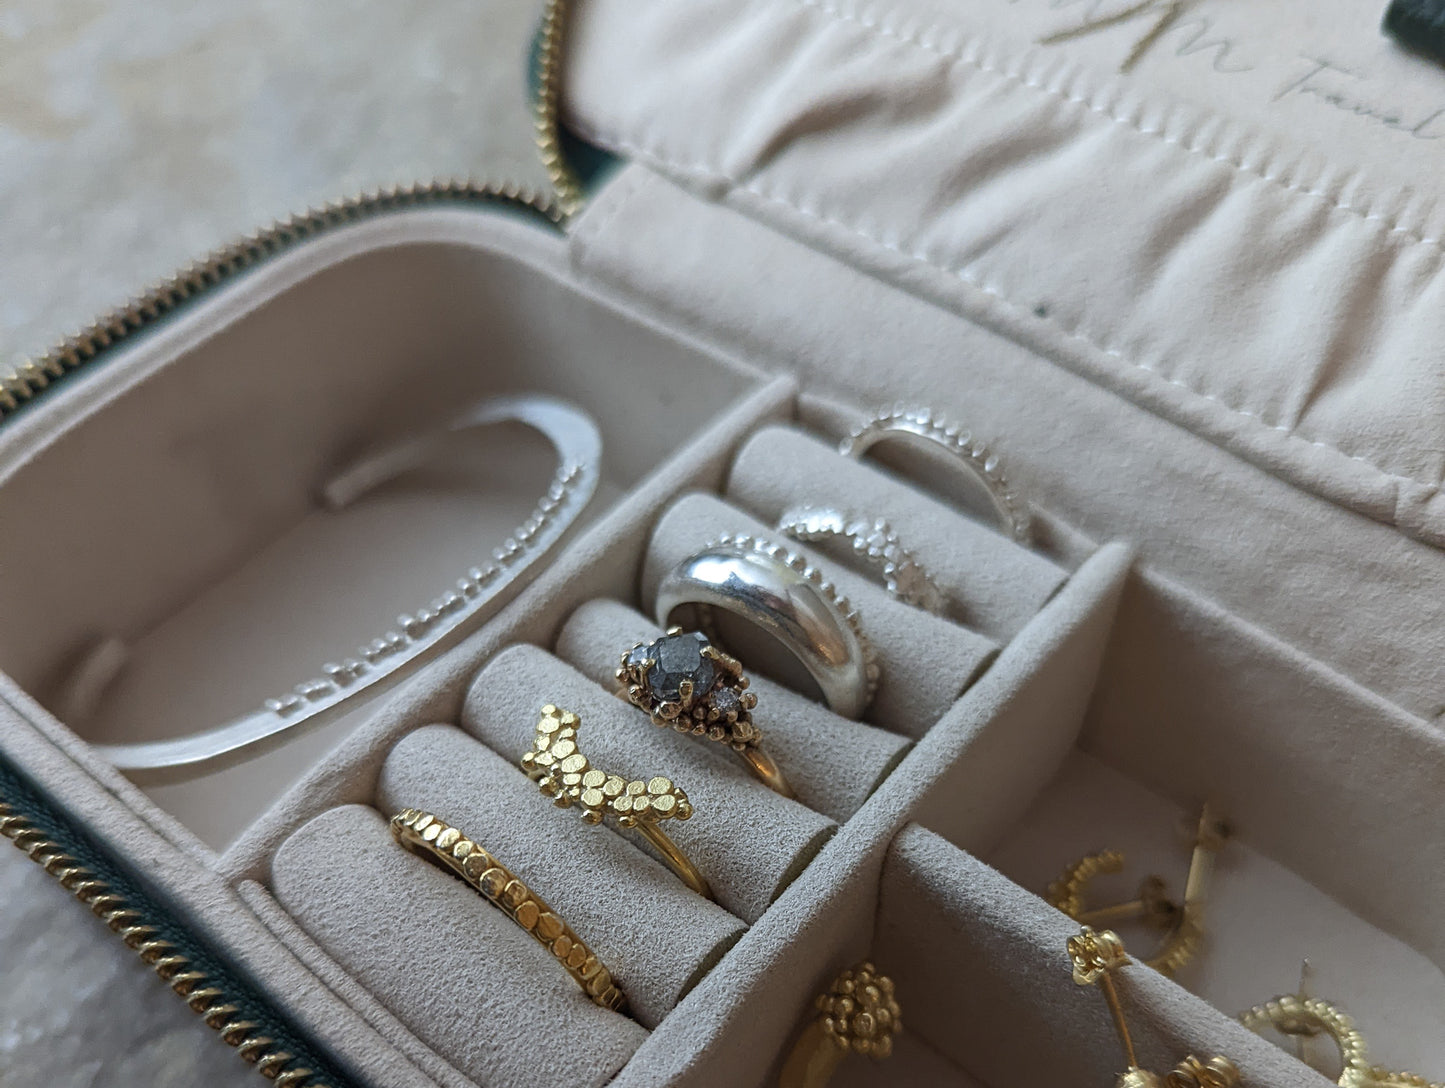 Load image into Gallery viewer, MM Travel Jewellery Case - MILLY MAUNDER
